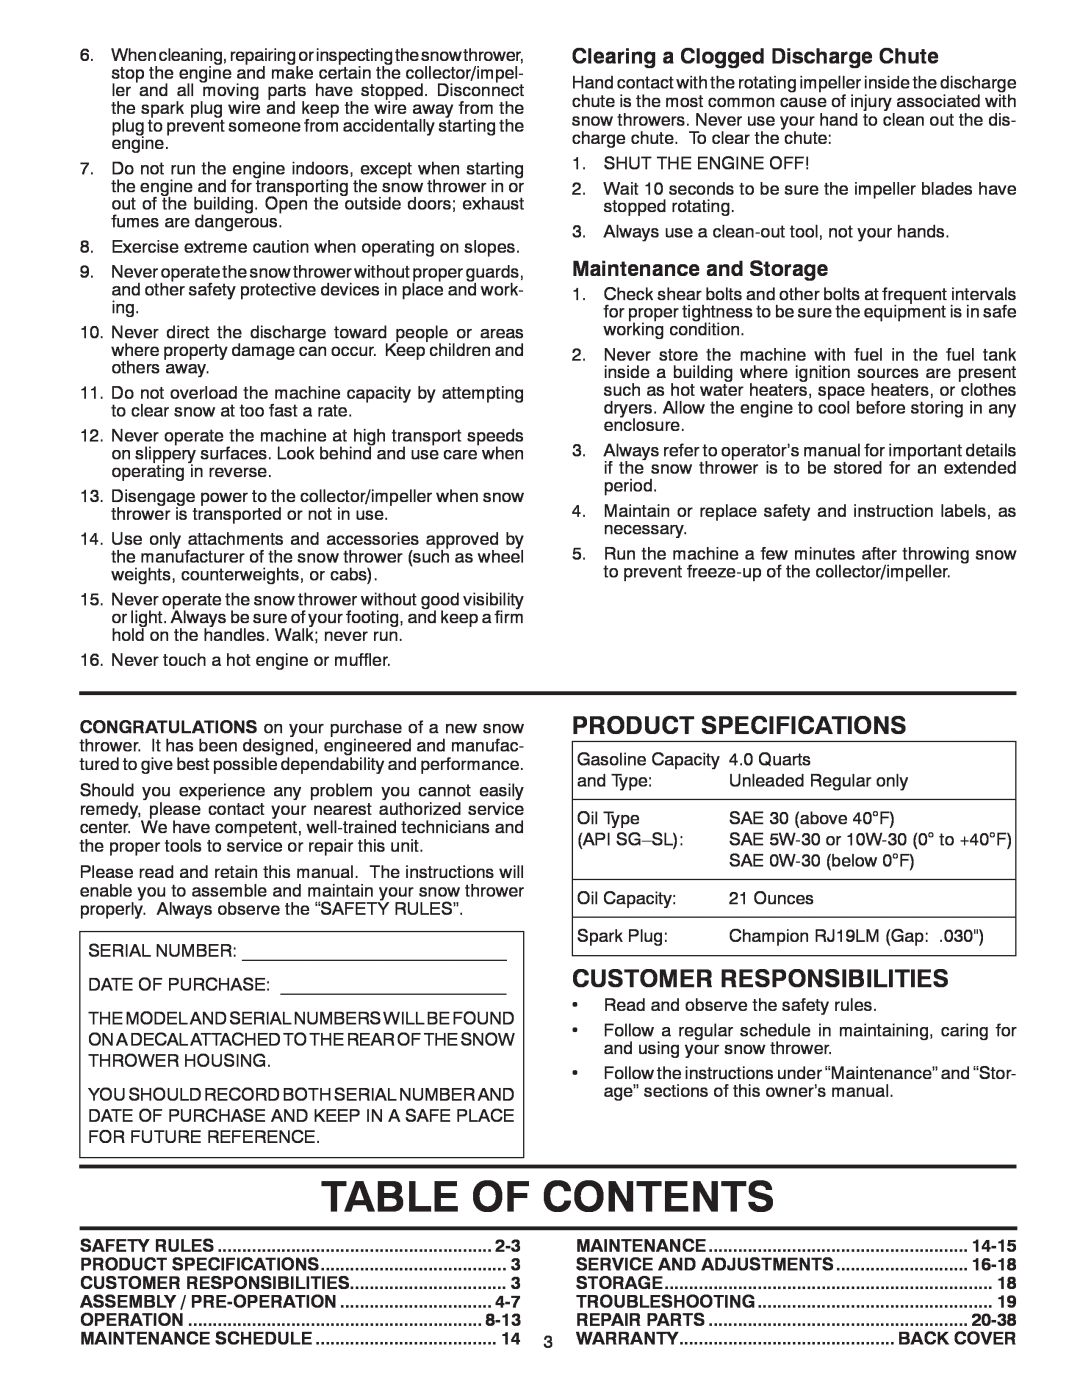 Poulan 421281 Table Of Contents, Product Specifications, Customer Responsibilities, Clearing a Clogged Discharge Chute 